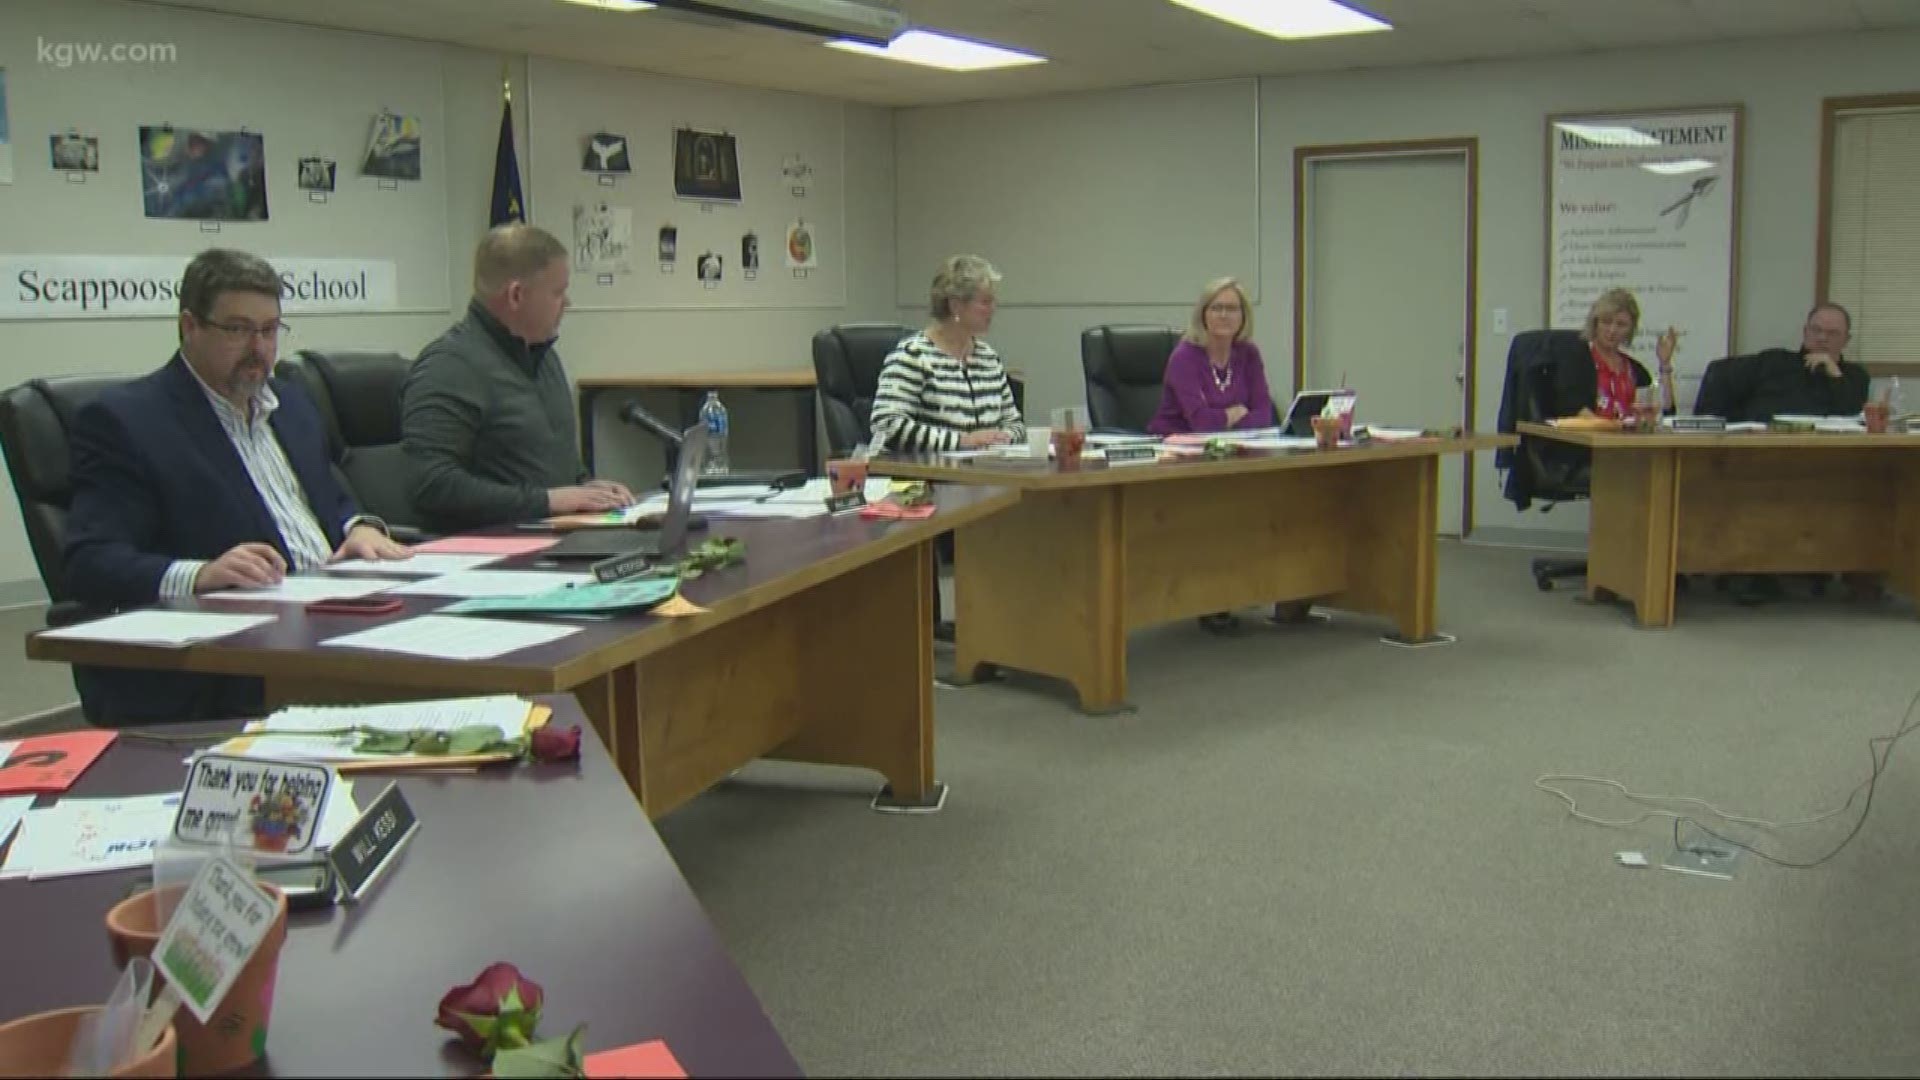 A school board Scappoose voted to allow the book “George” in an upcoming reading competition.